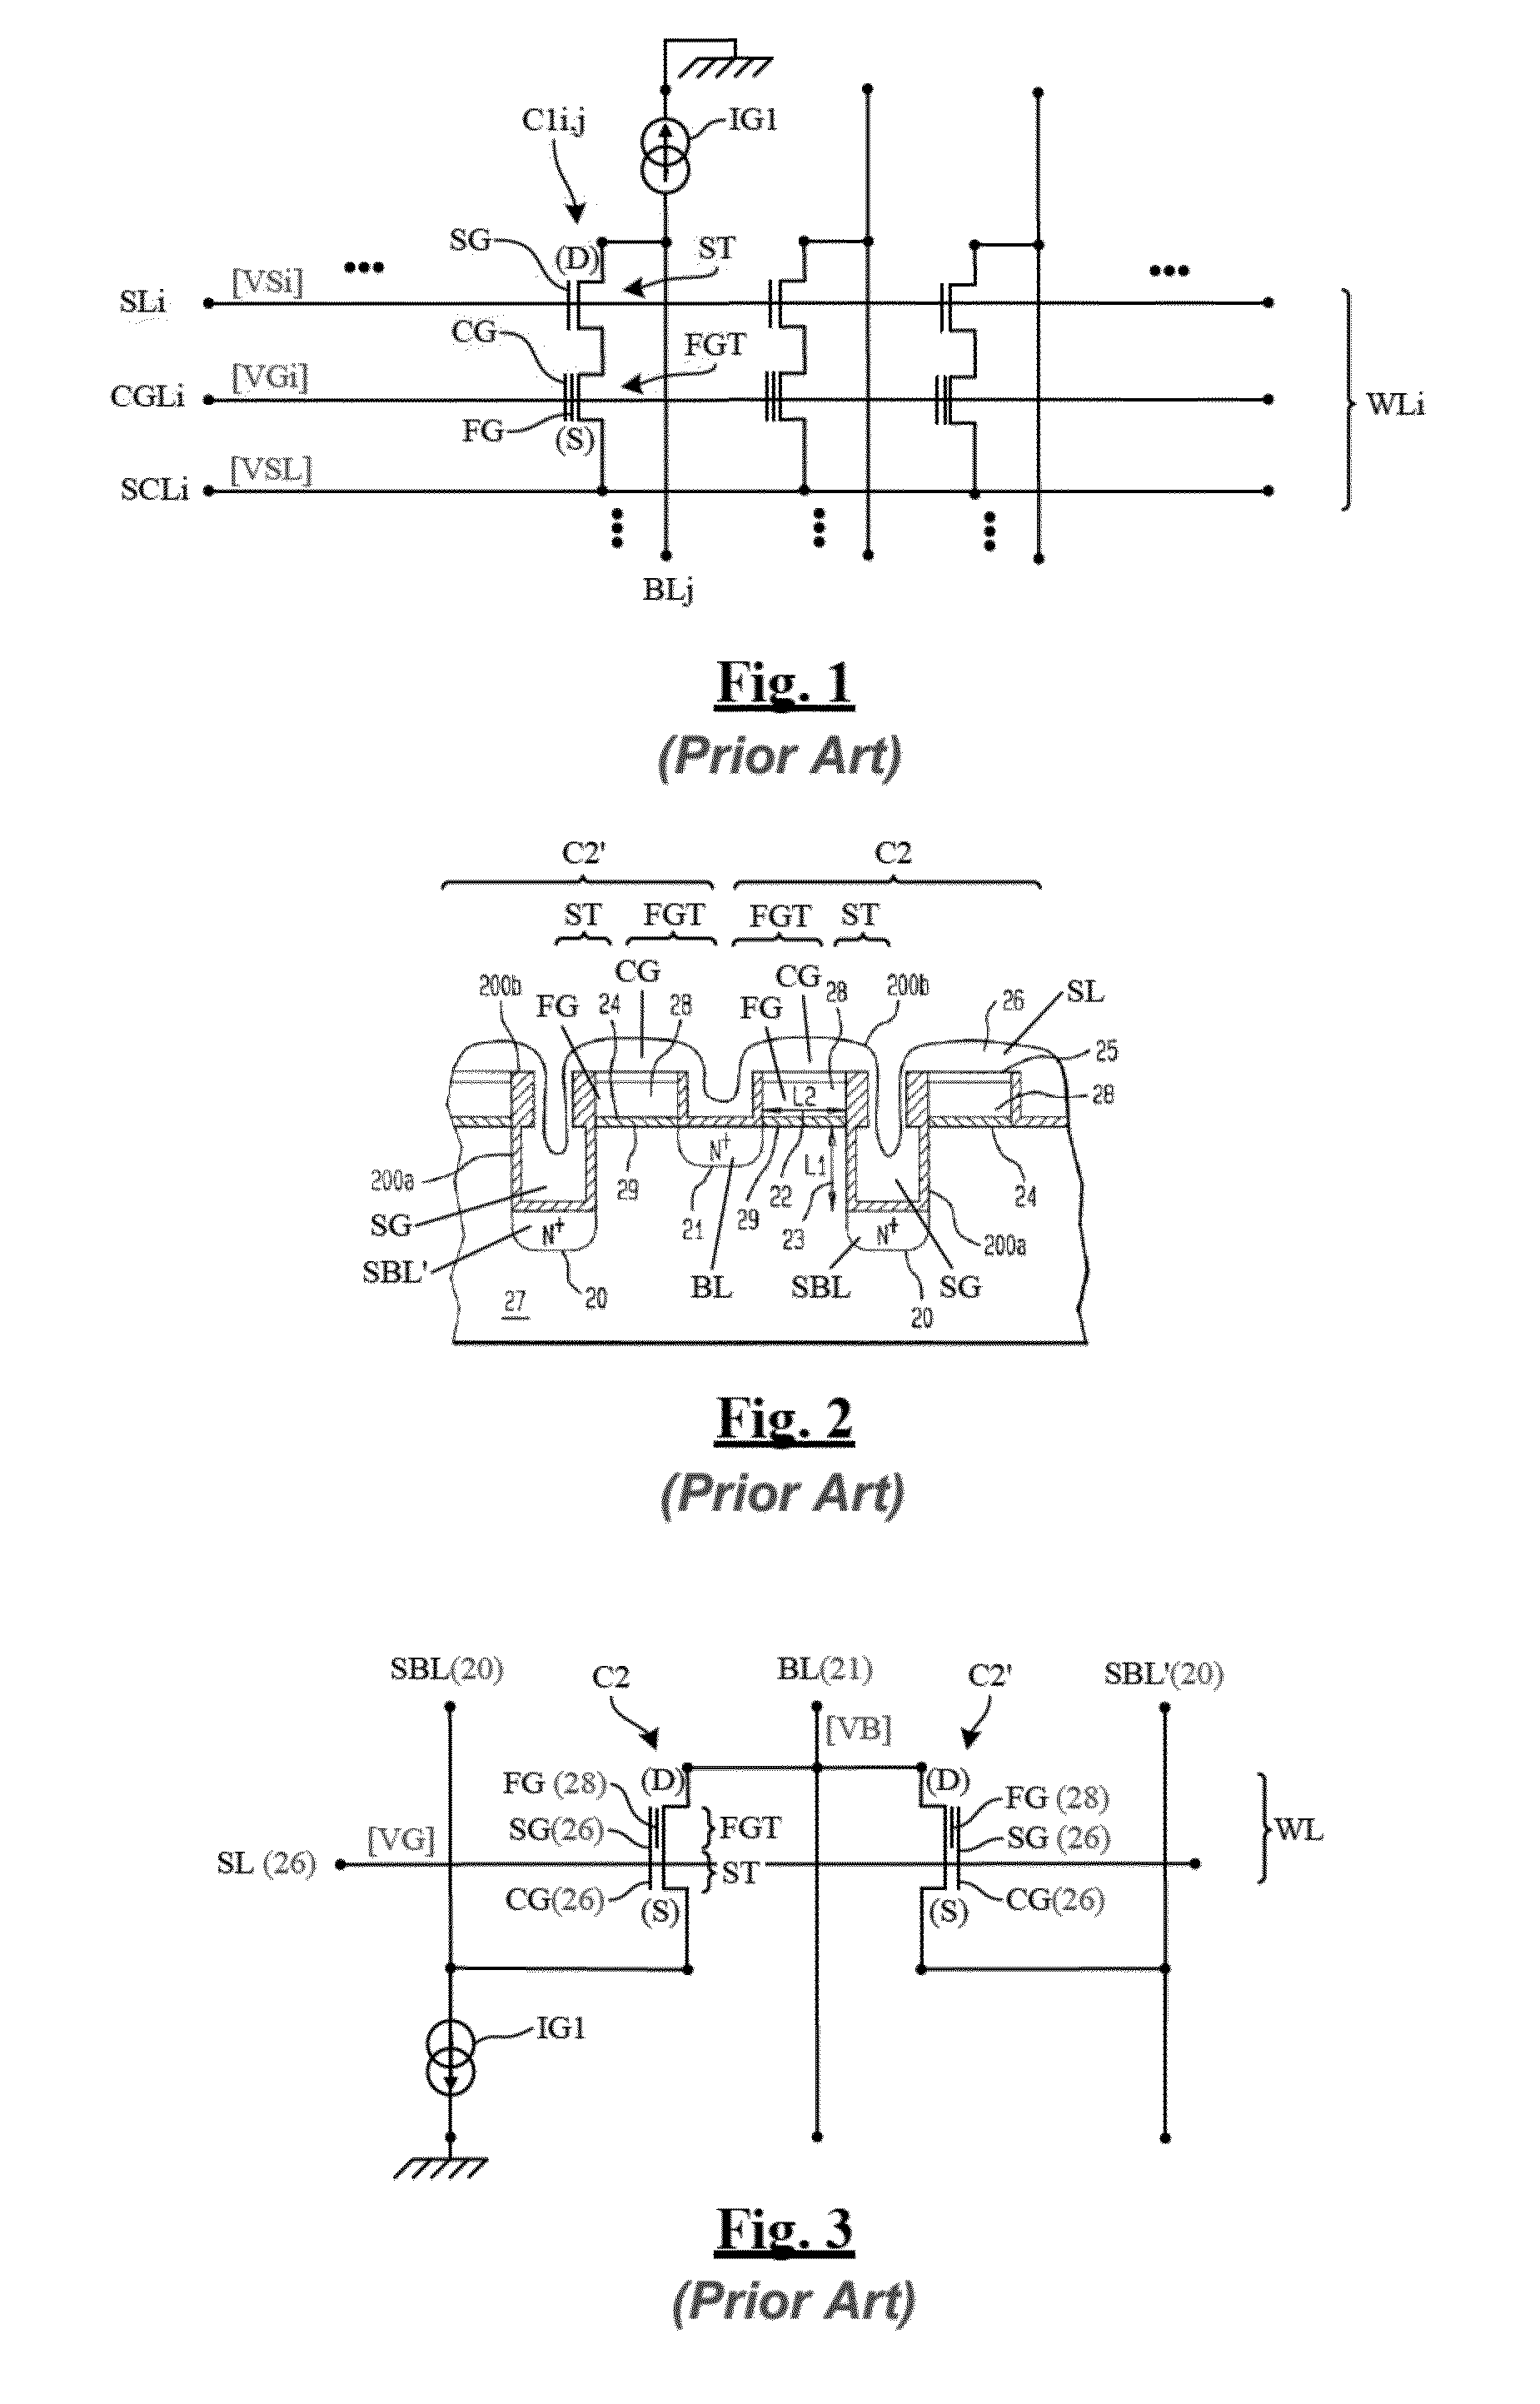 Hot-carrier injection programmable memory and method of programming such a memory